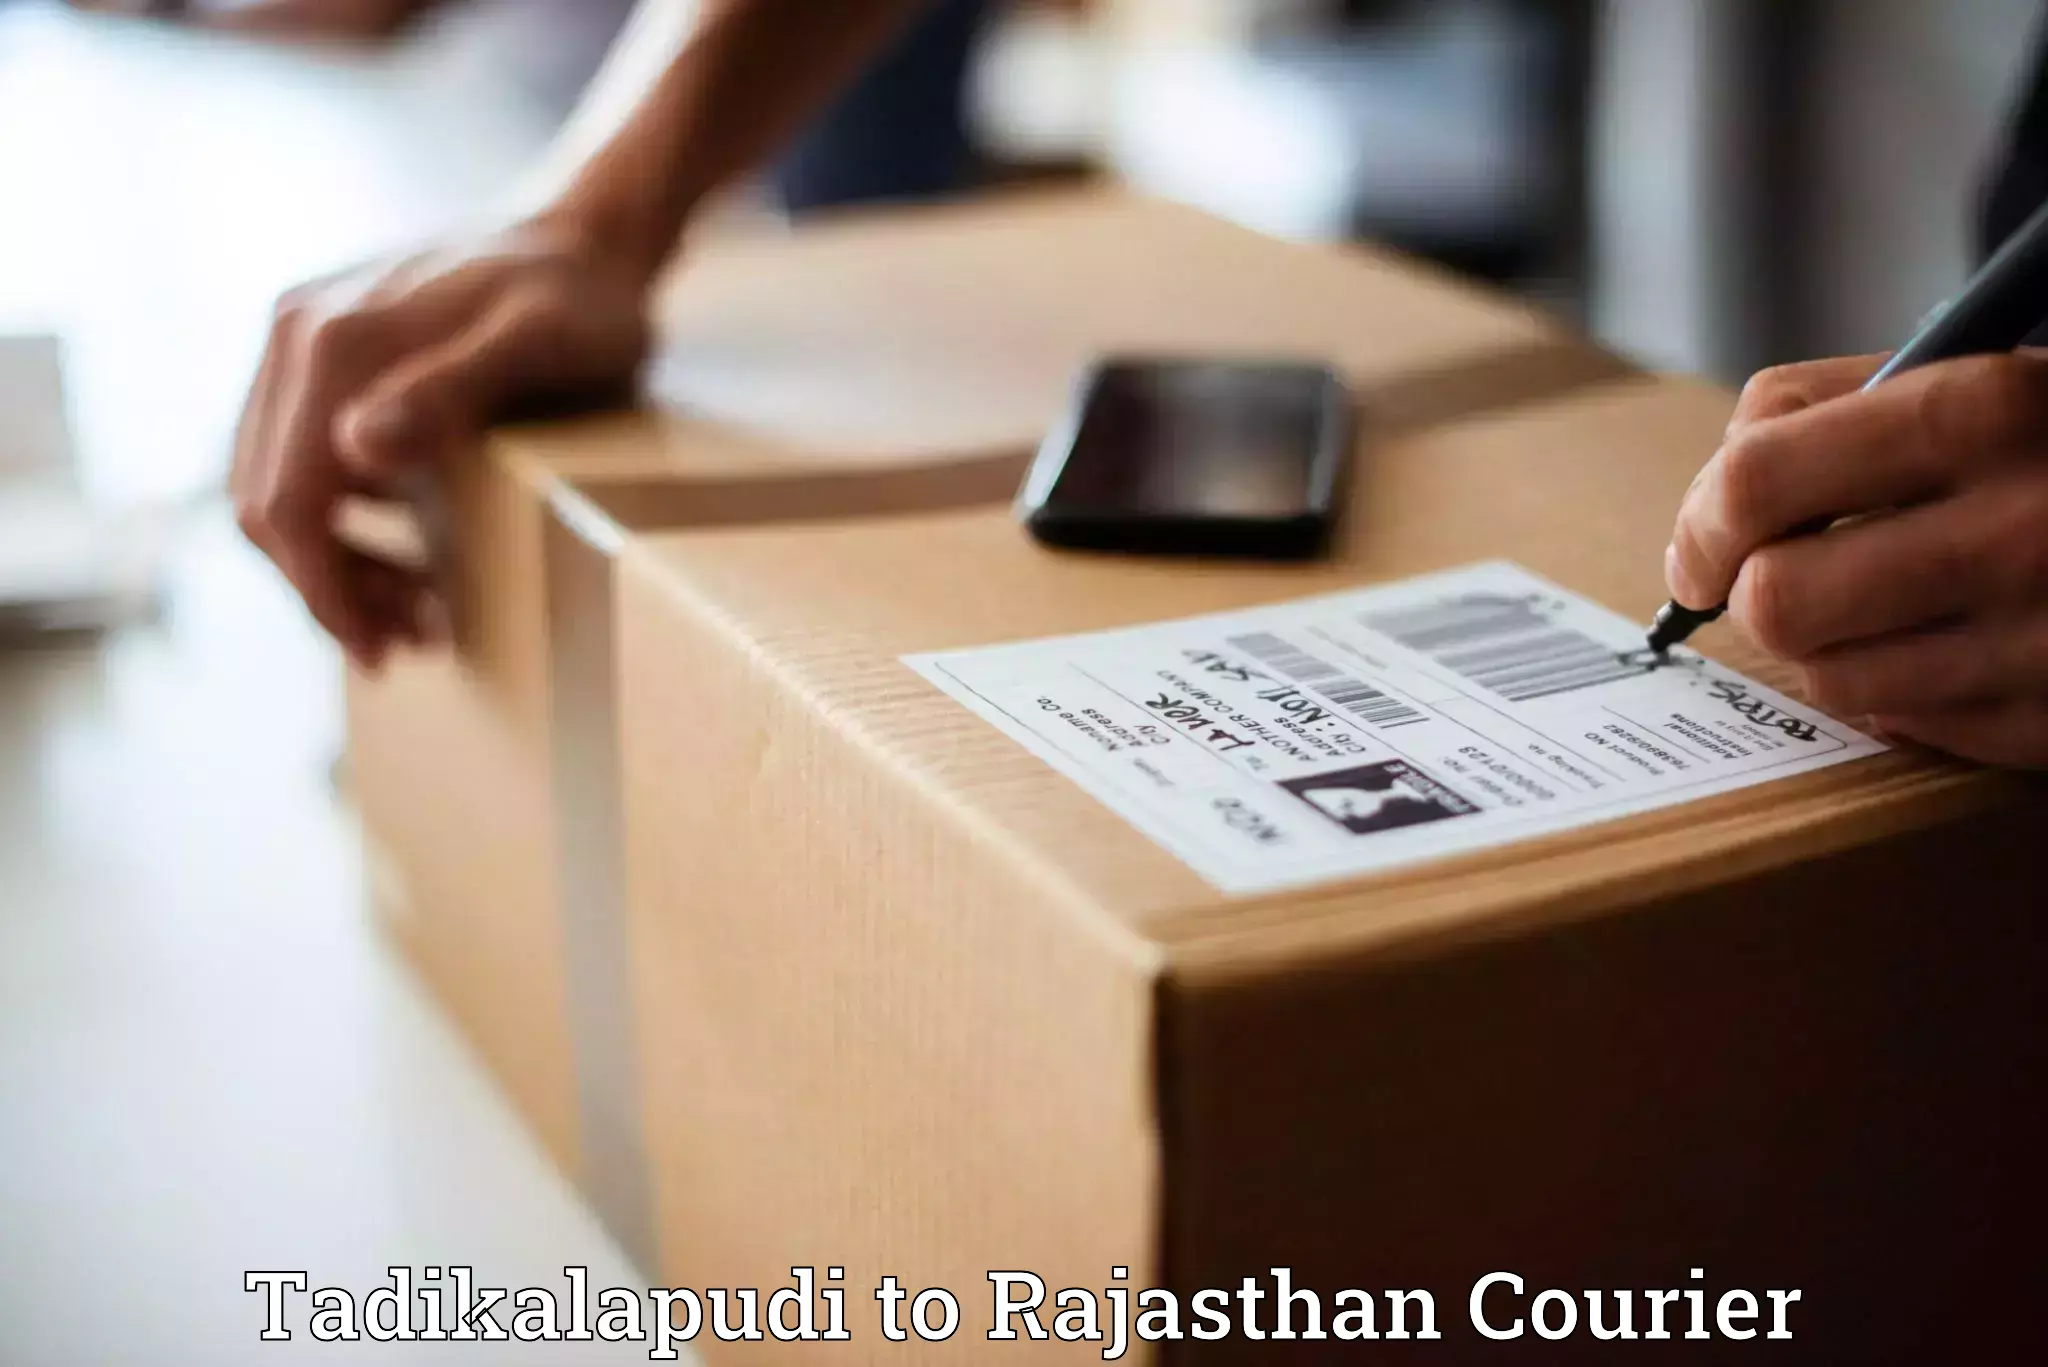 State-of-the-art courier technology Tadikalapudi to Rajasthan